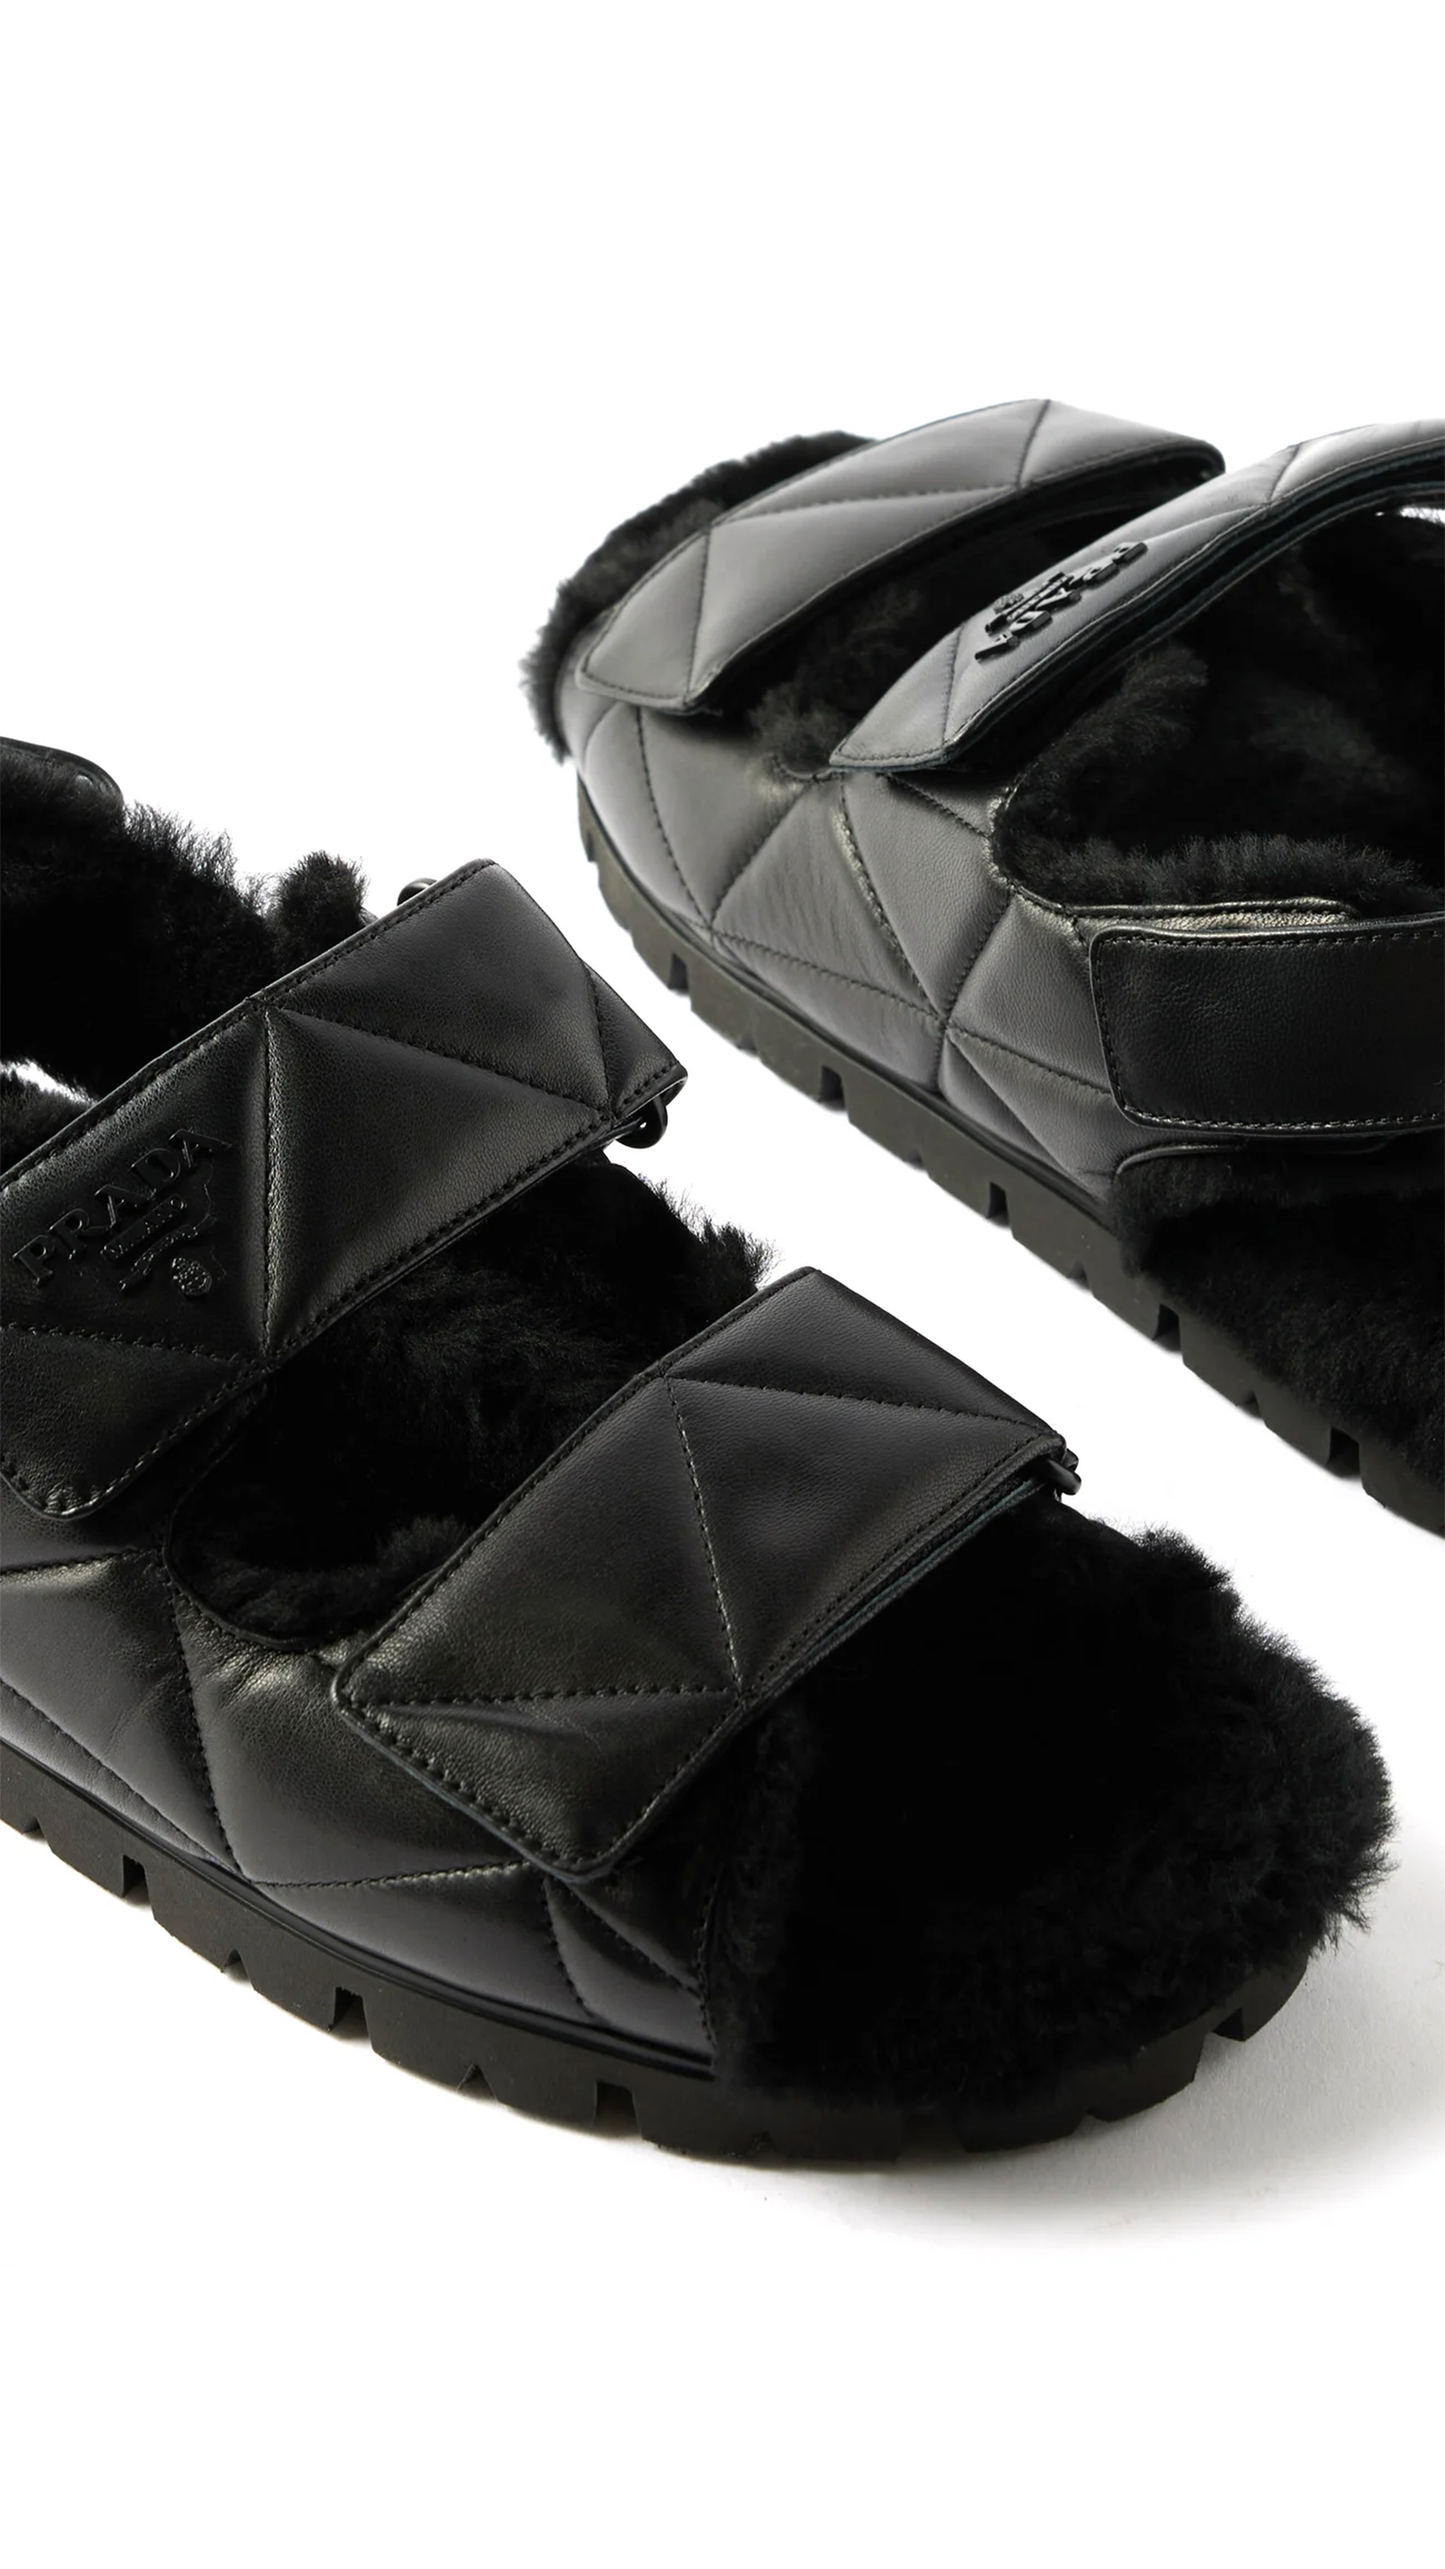 Padded Nappa Leather Sandals with Shearling - Black